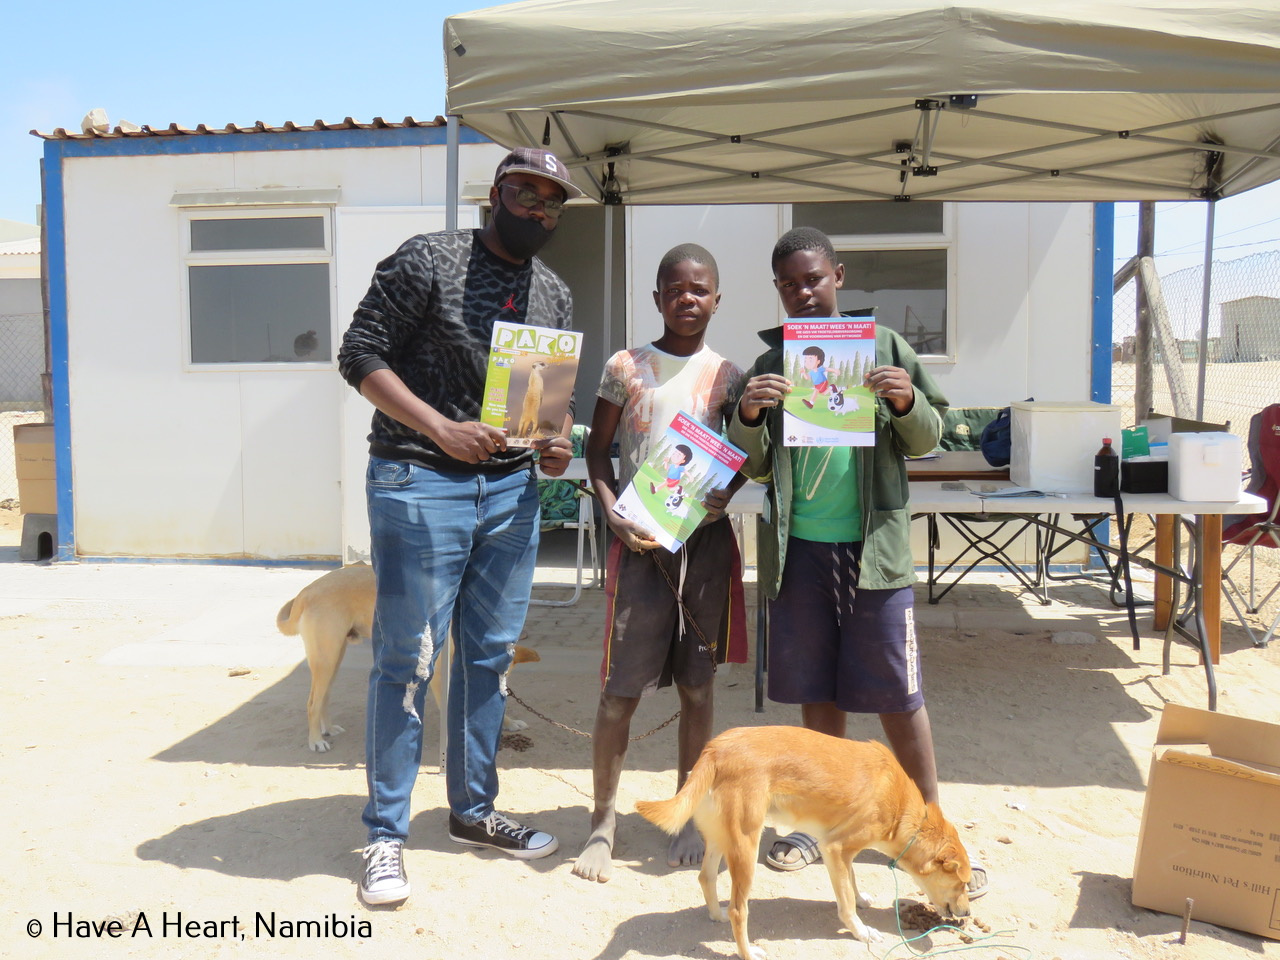 Have a Heart Namibia educate the community against rabies using GARC education resources.